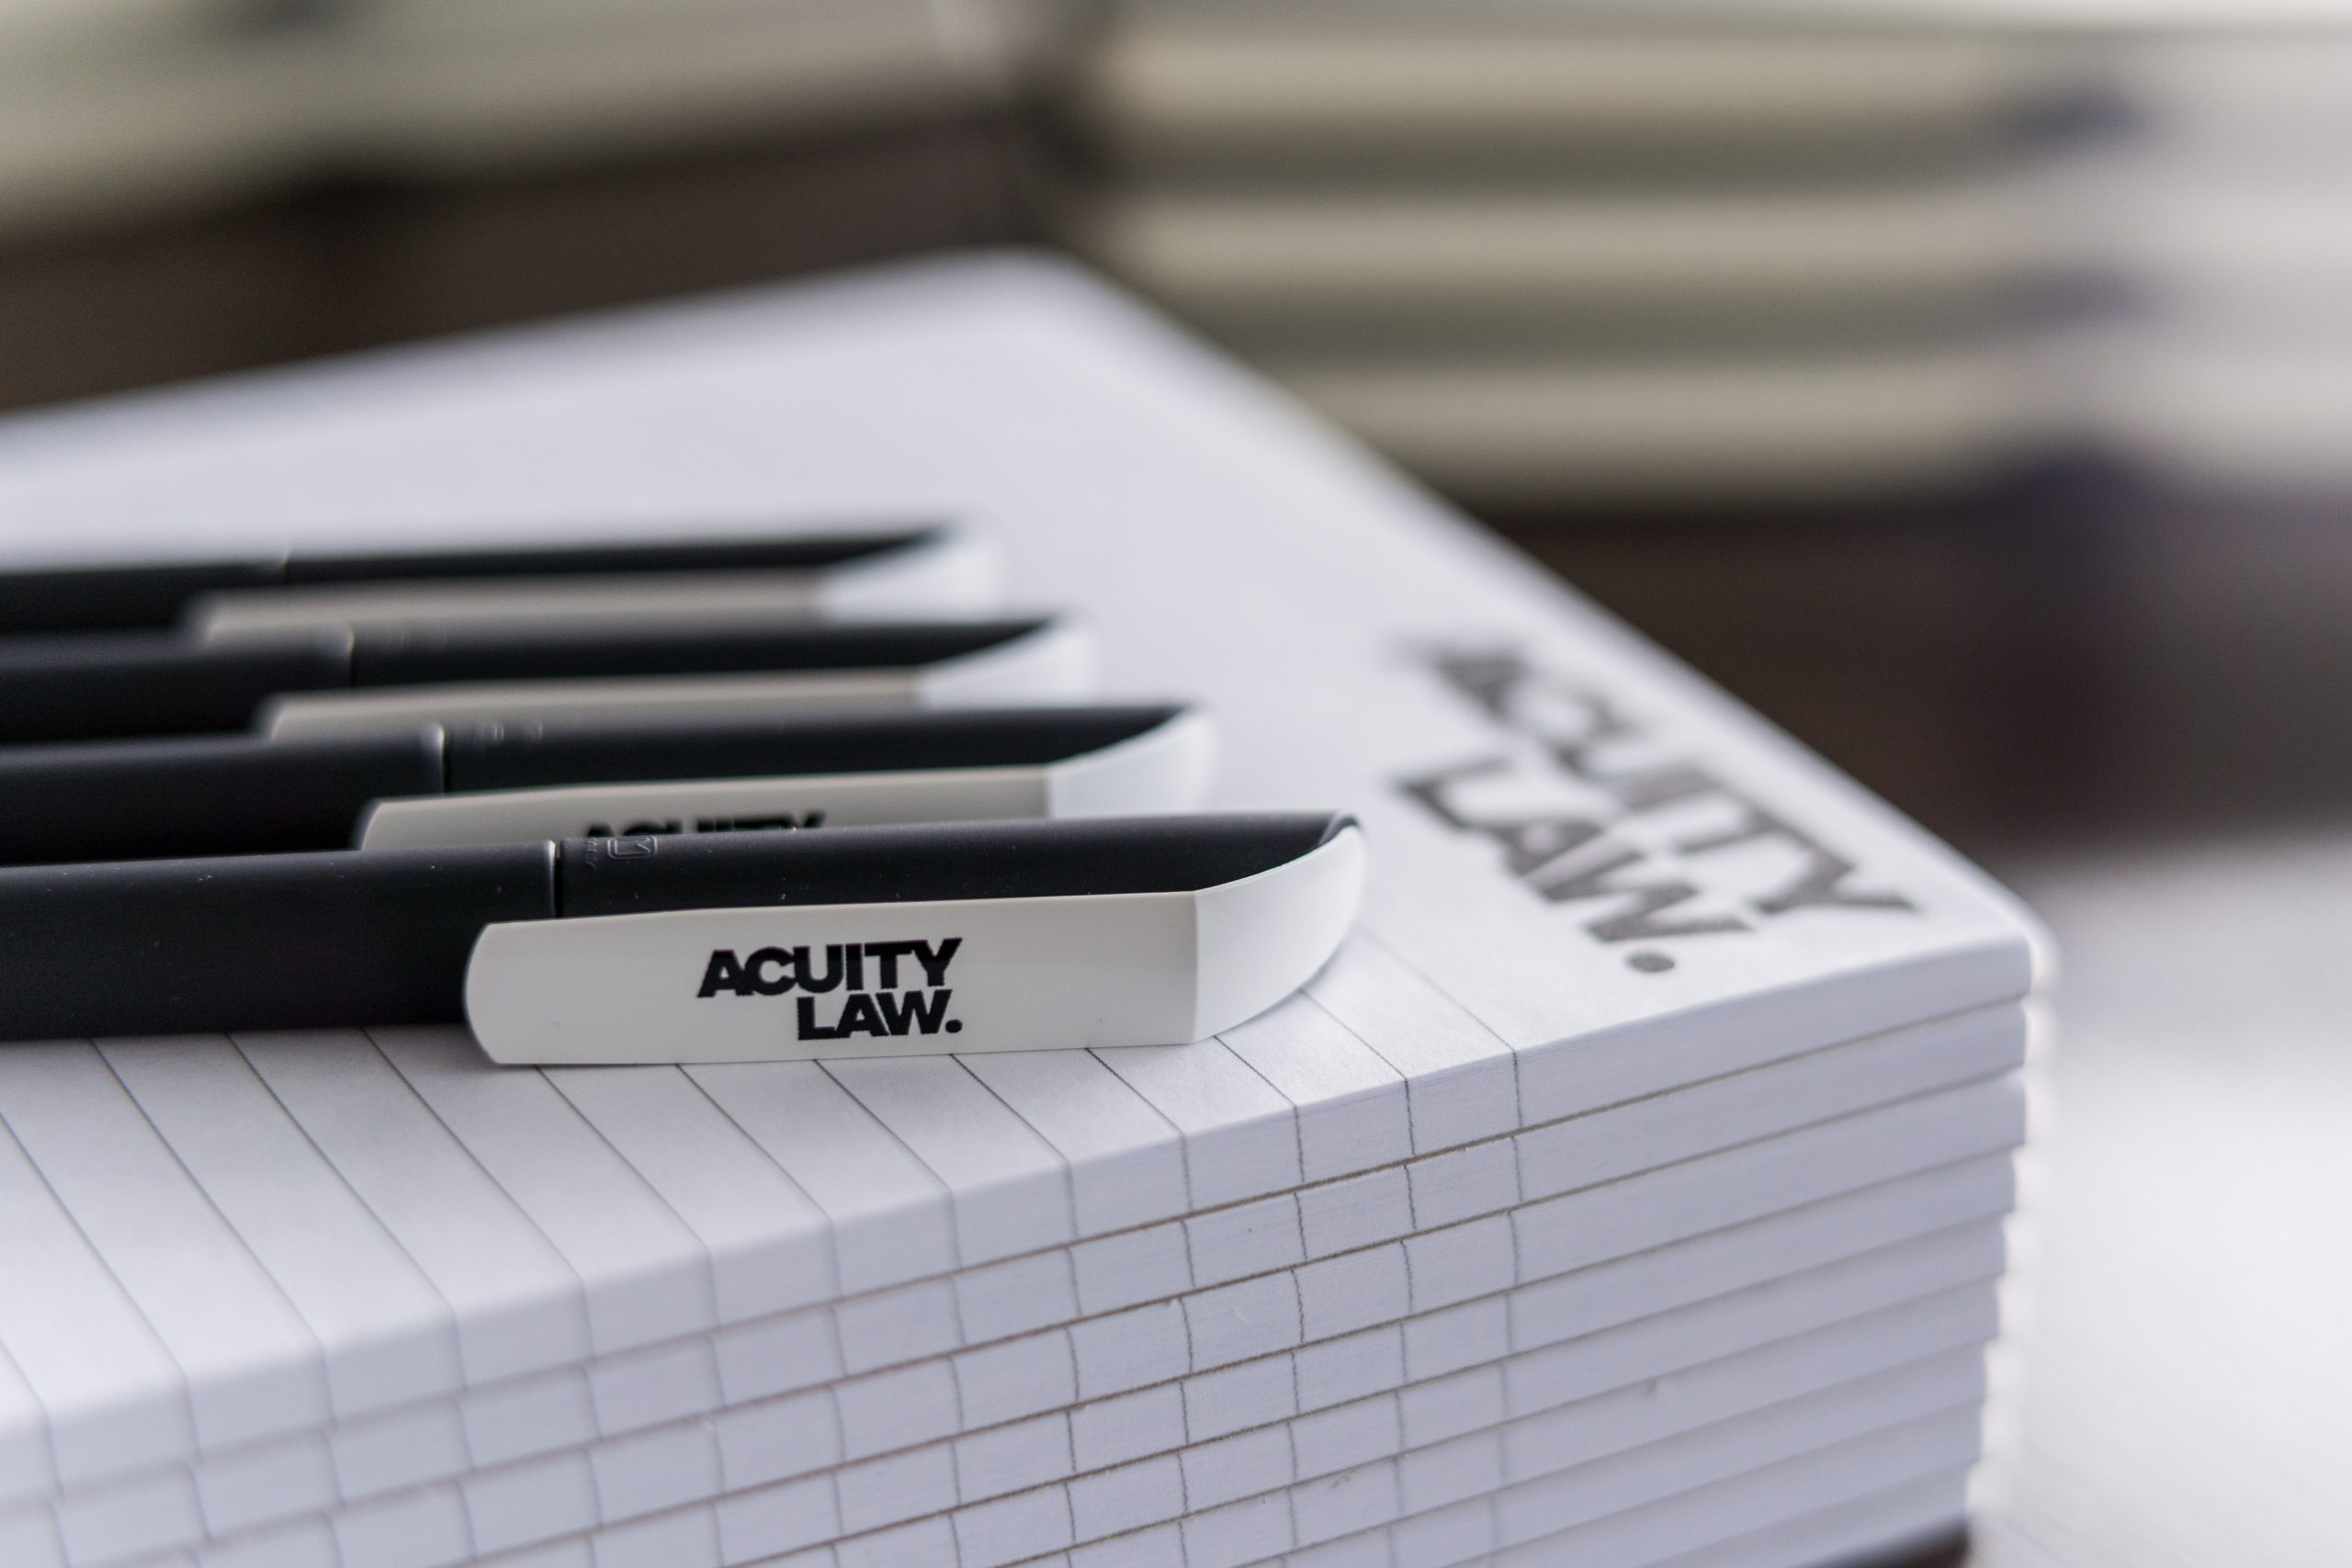 Acuity Law pens and notebooks